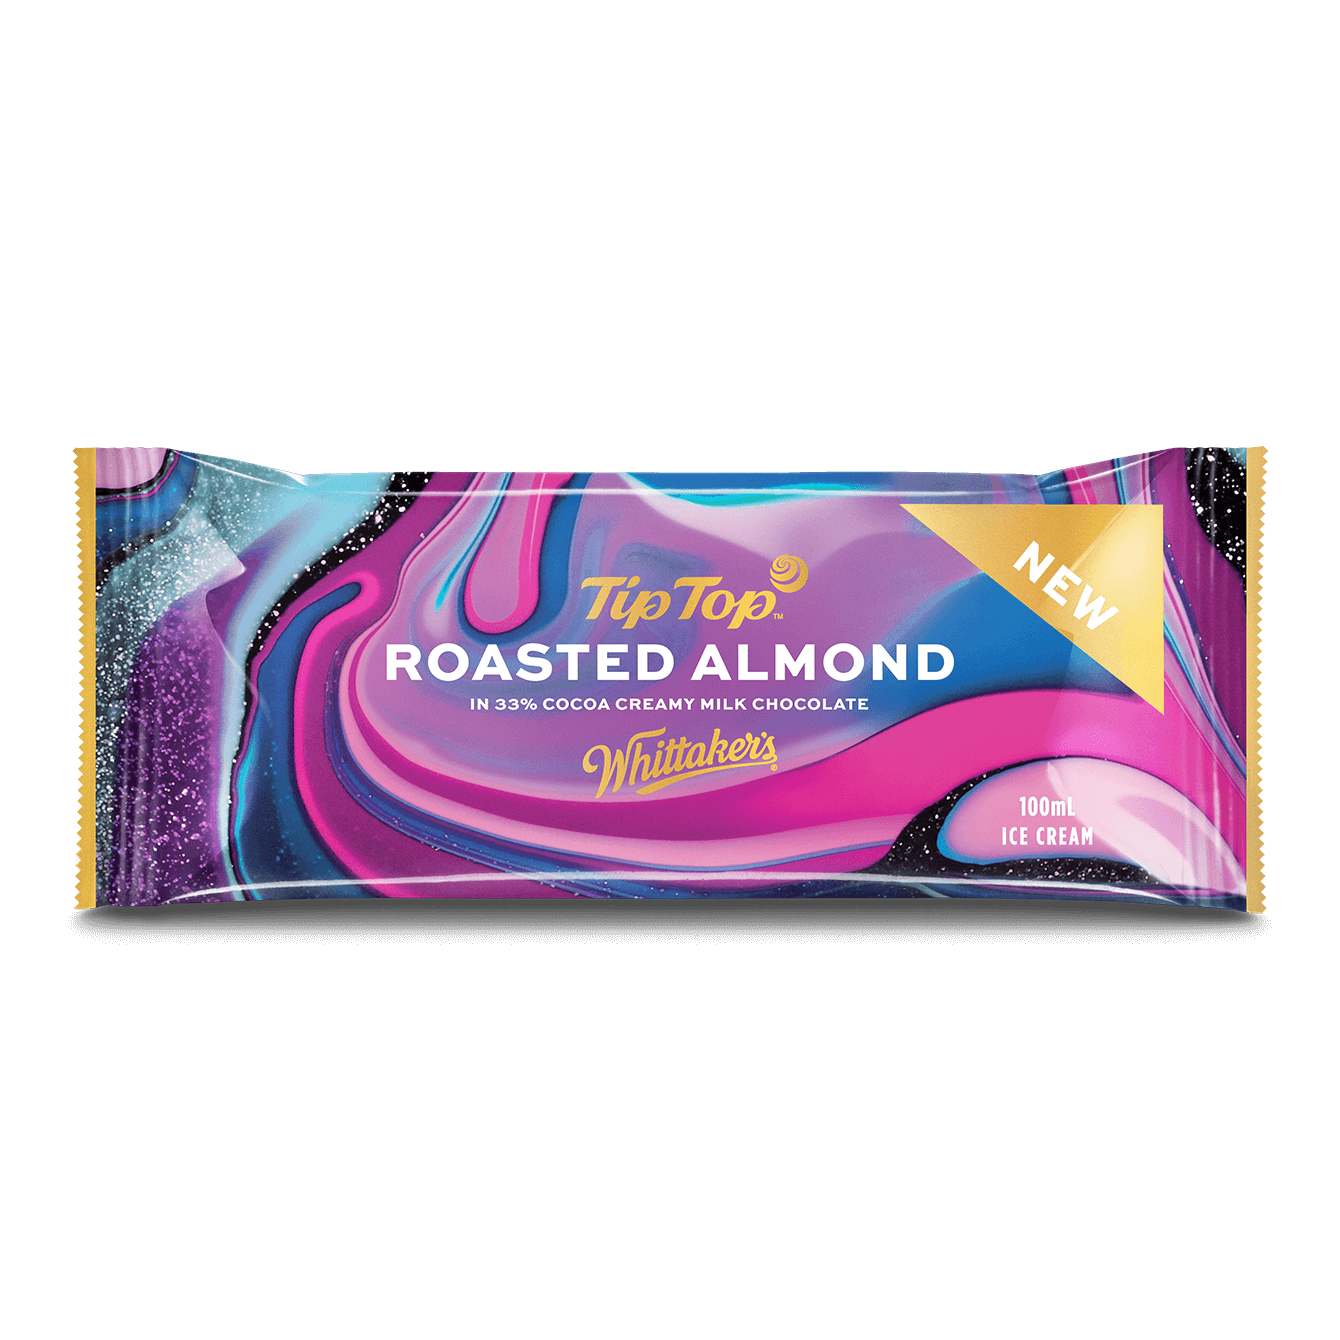 Tip Top Roasted Almond Chocolate Bar Packaging Design